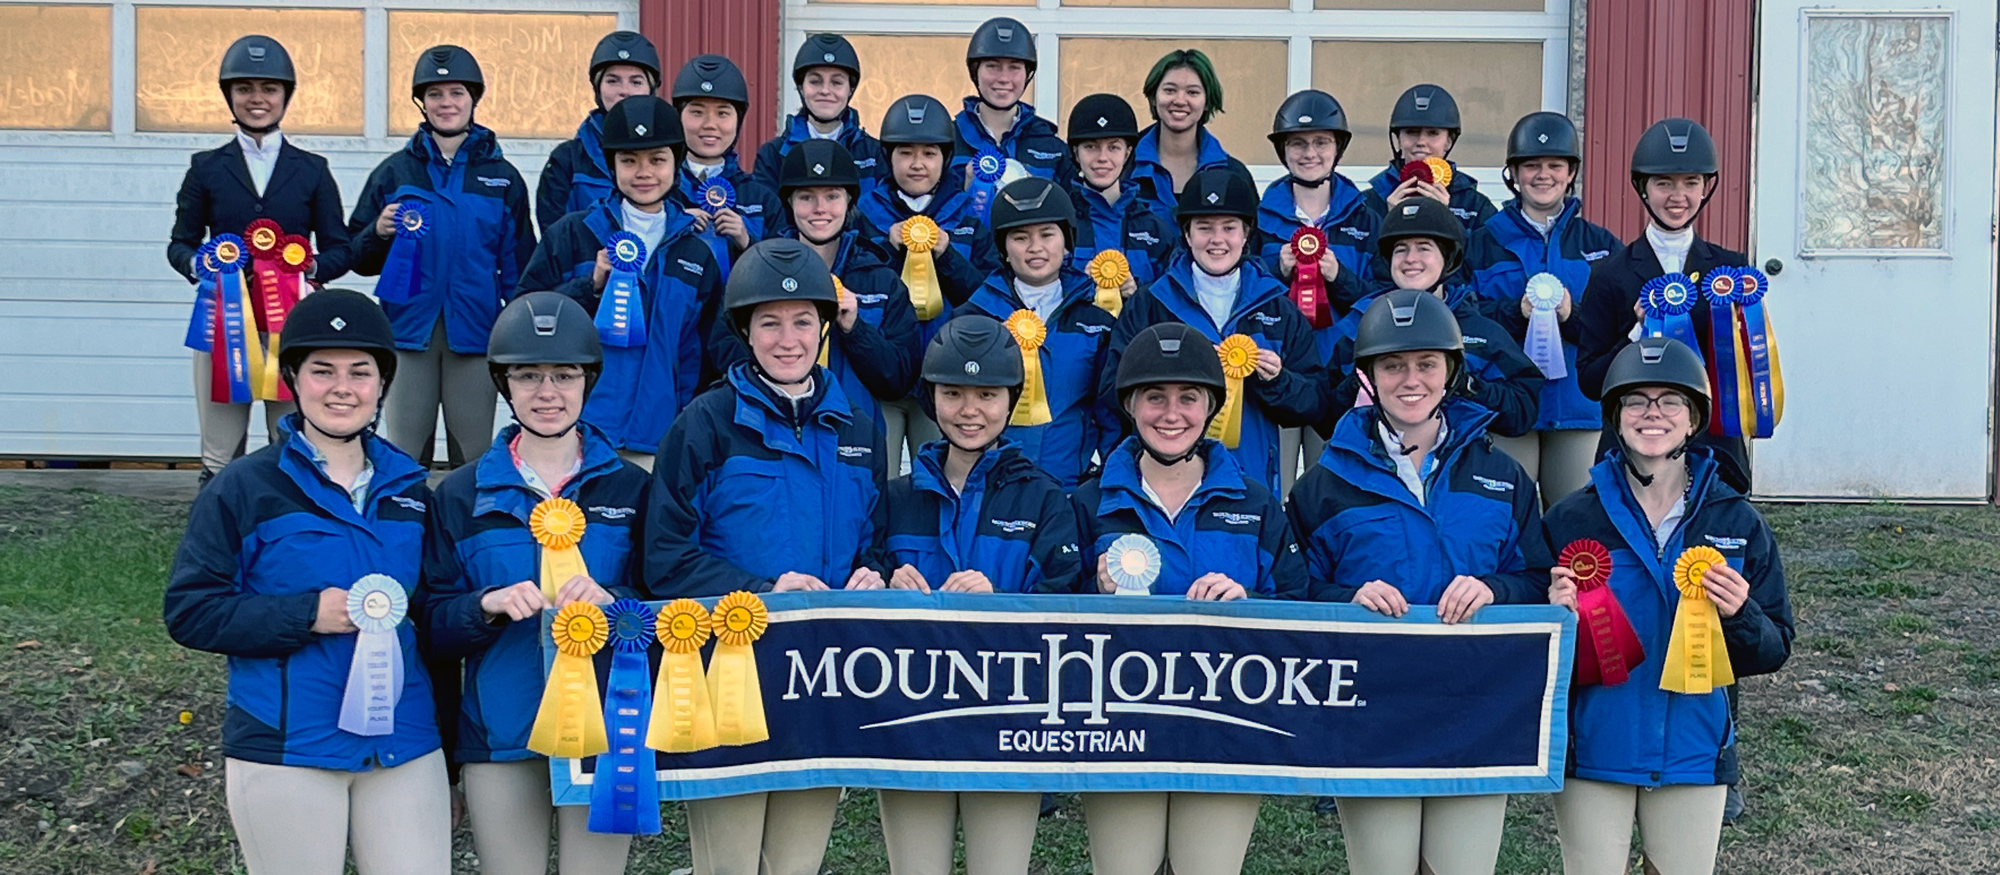 Mount Holyoke captured High Point College Champion honors among eight teams at the Smith College Show at Muddy Brook Farm in Amherst, Mass., on Oct. 30, 2022.